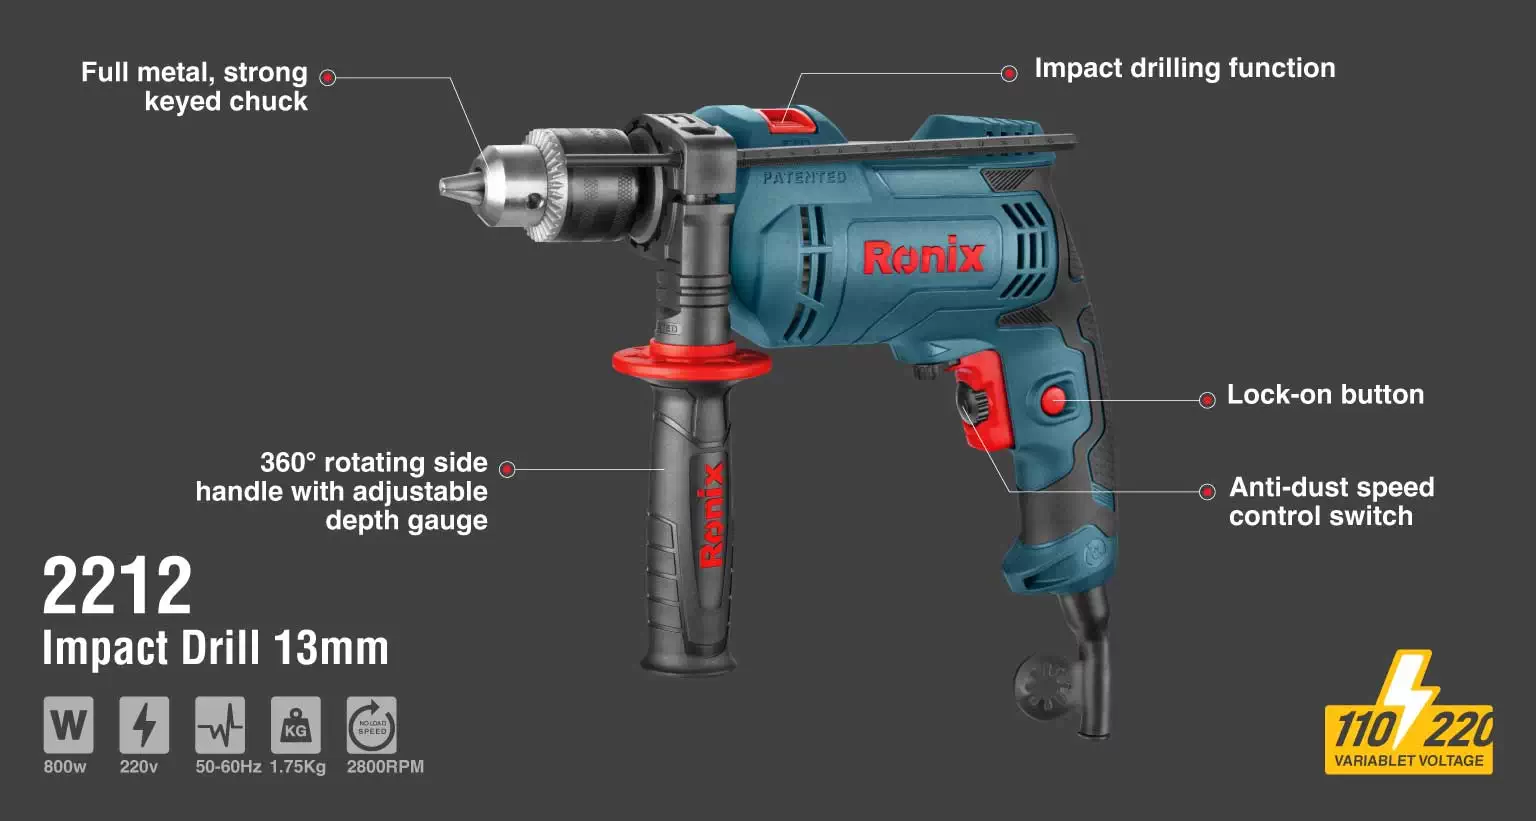 Ronix Corded Impact Drill, 800W, 13mm_details